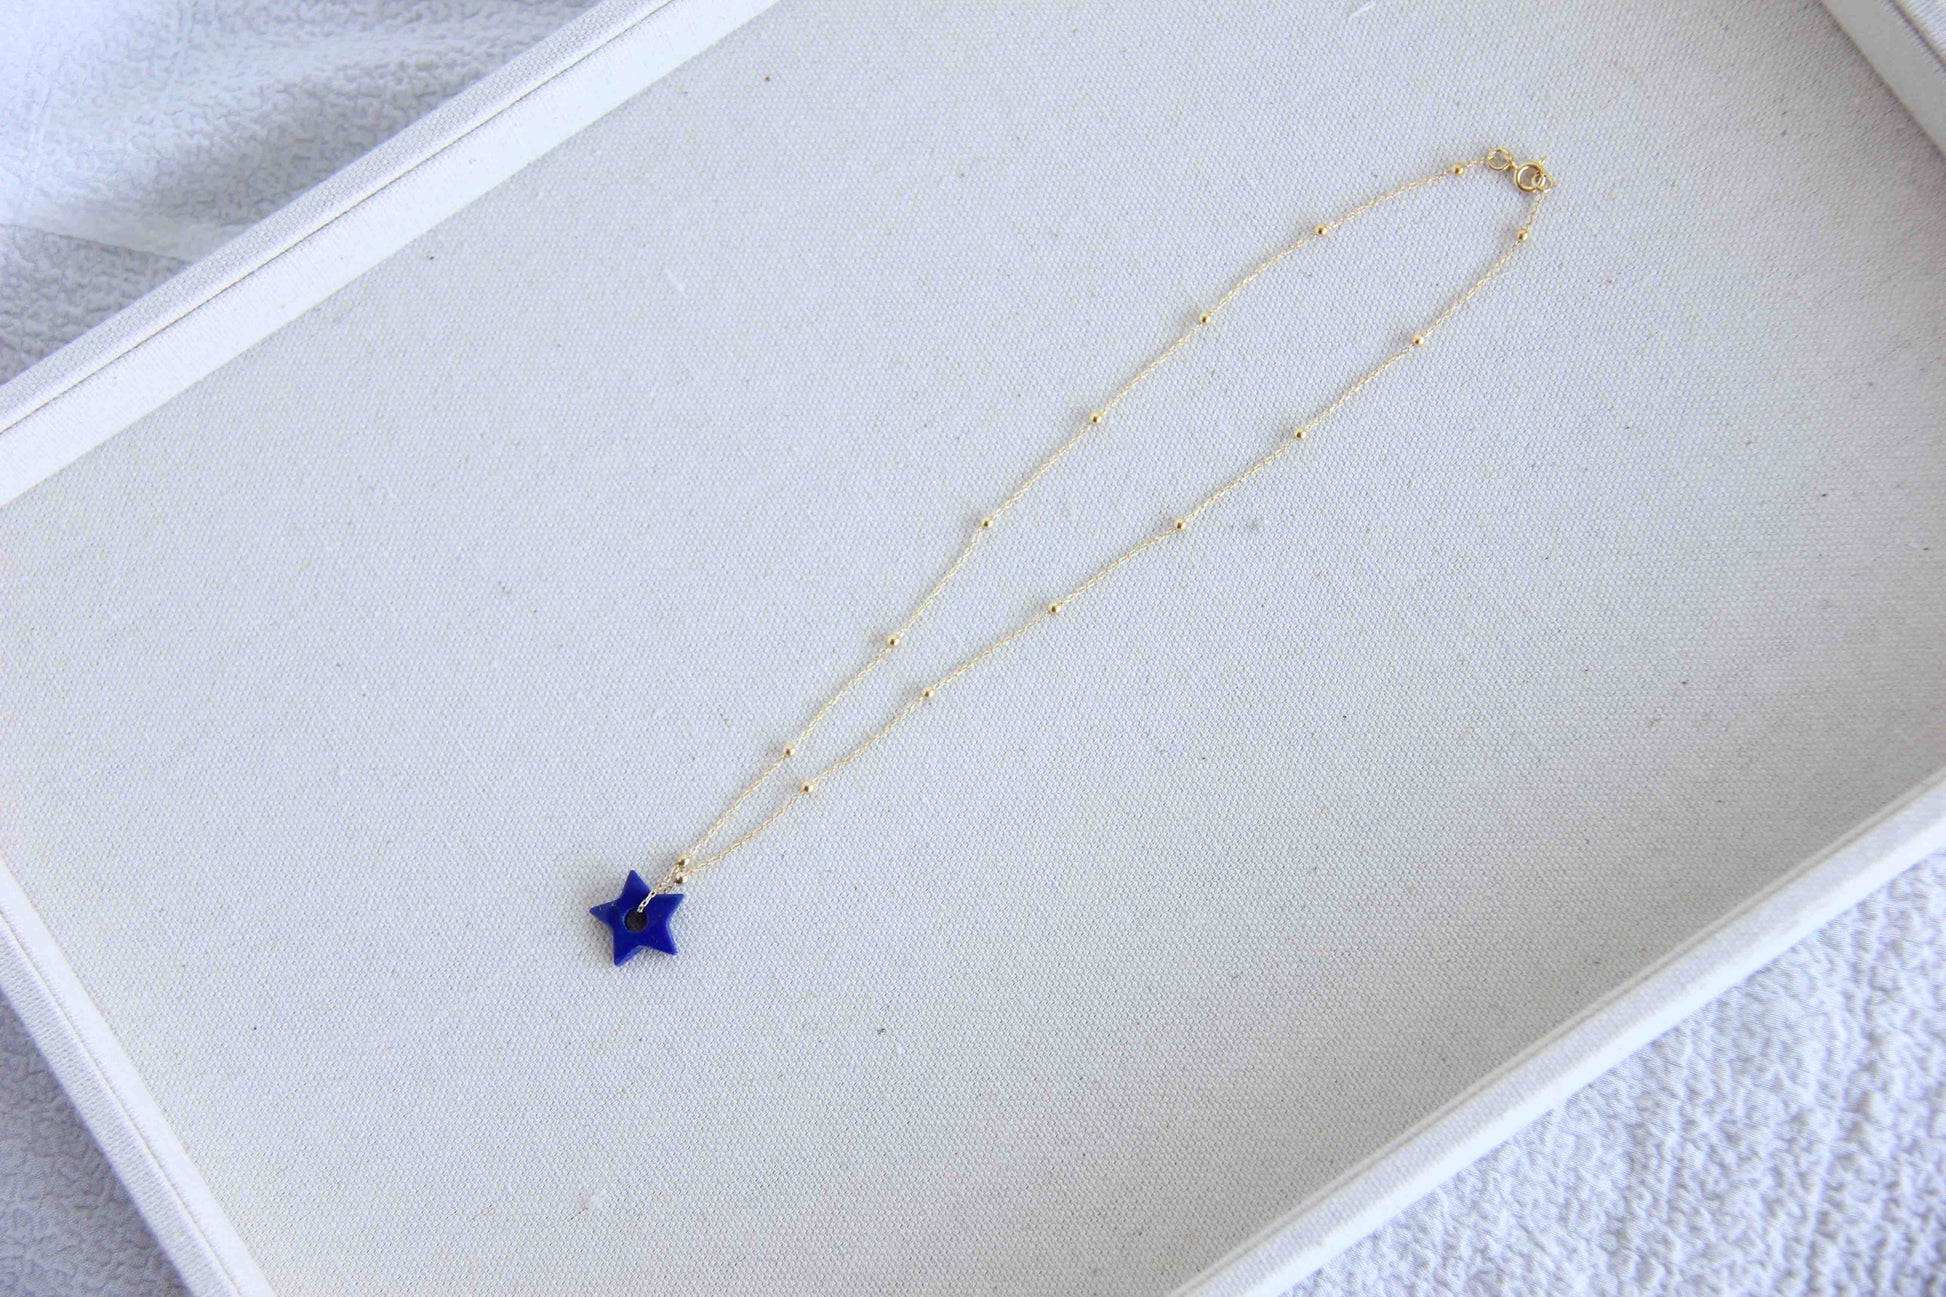 Lapis Lazuli Beaded 18K Gold Micro Plated on solid 925 Sterling Silver Chain Necklace